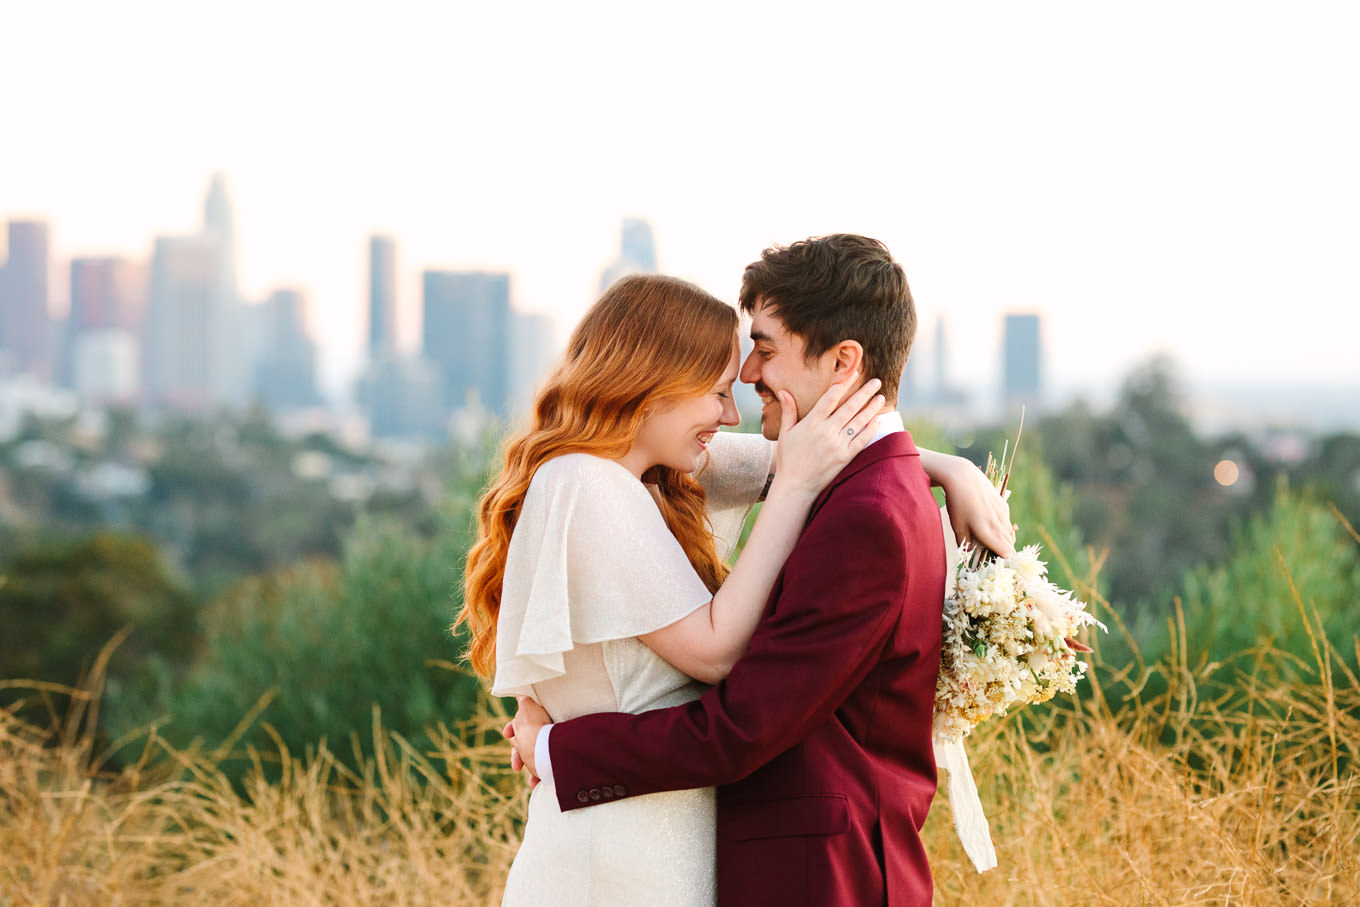 Elopement portrait with LA skyline | Los Angeles Elysian Park Elopement | Colorful and elevated wedding photography for fun-loving couples in Southern California | #LosAngelesElopement #elopement #LAarboretum #LAskyline #elopementphotos   Source: Mary Costa Photography | Los Angeles